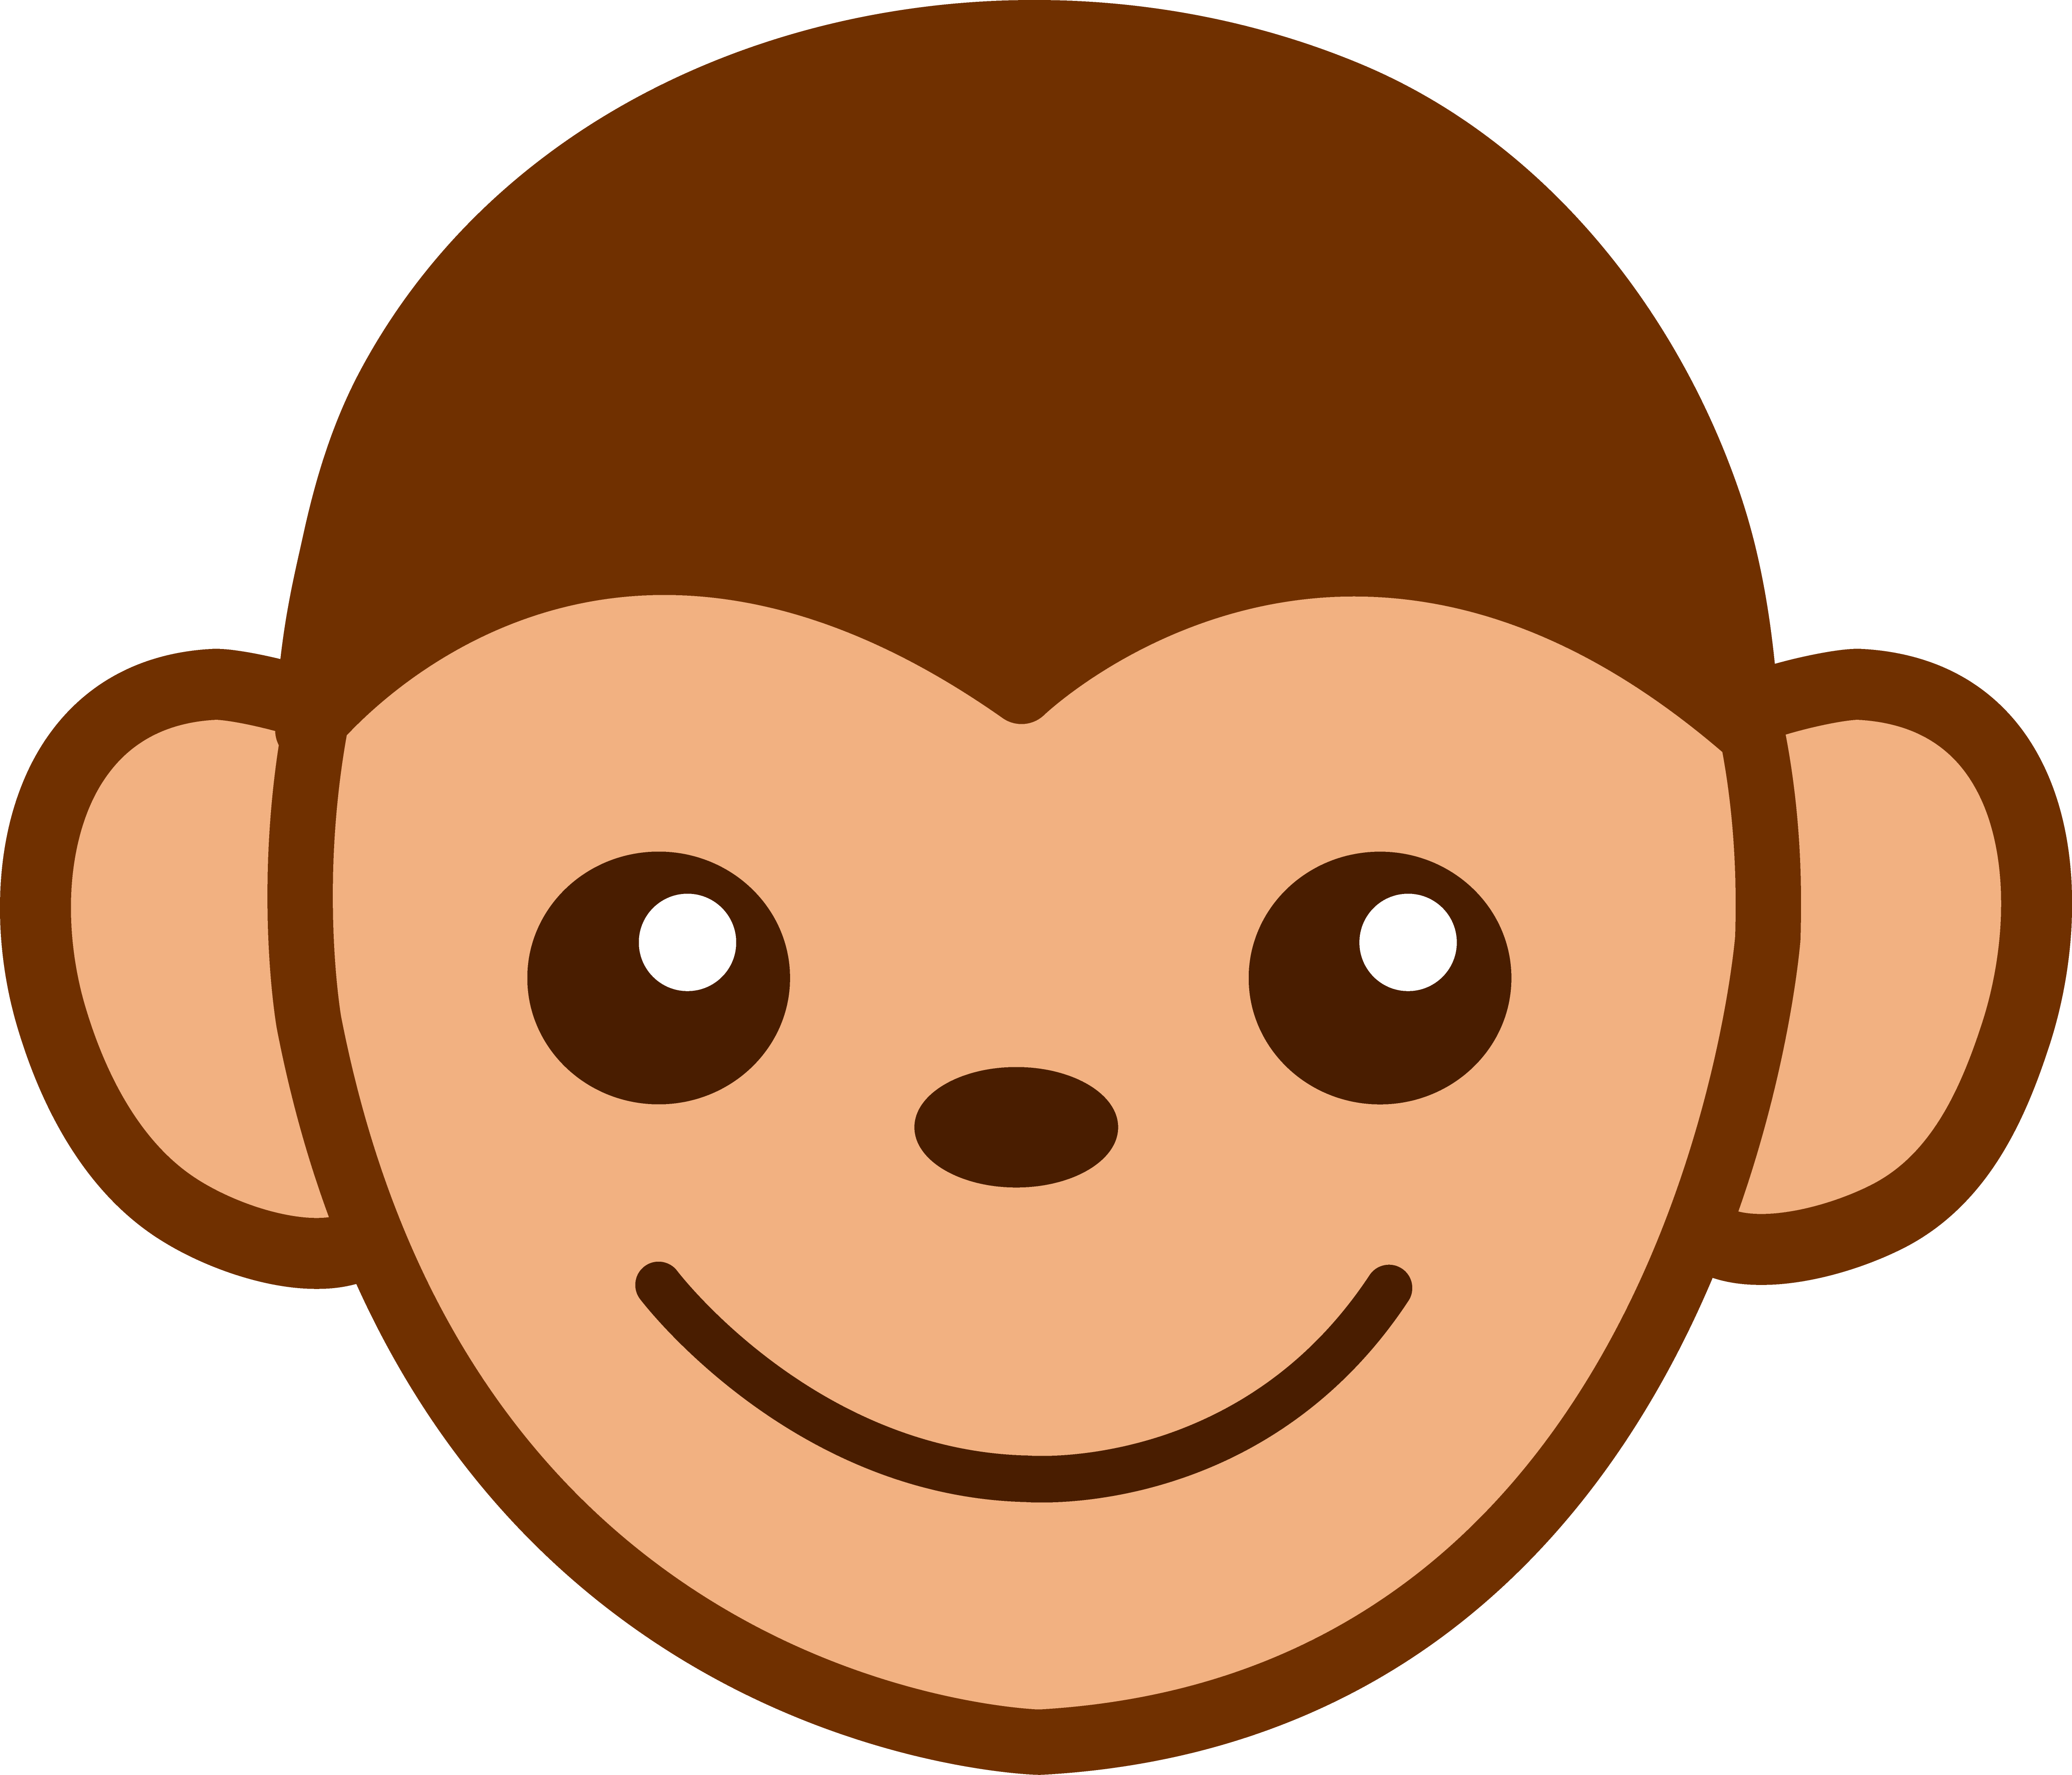 Images For > Sad Monkey Cartoon Drawings